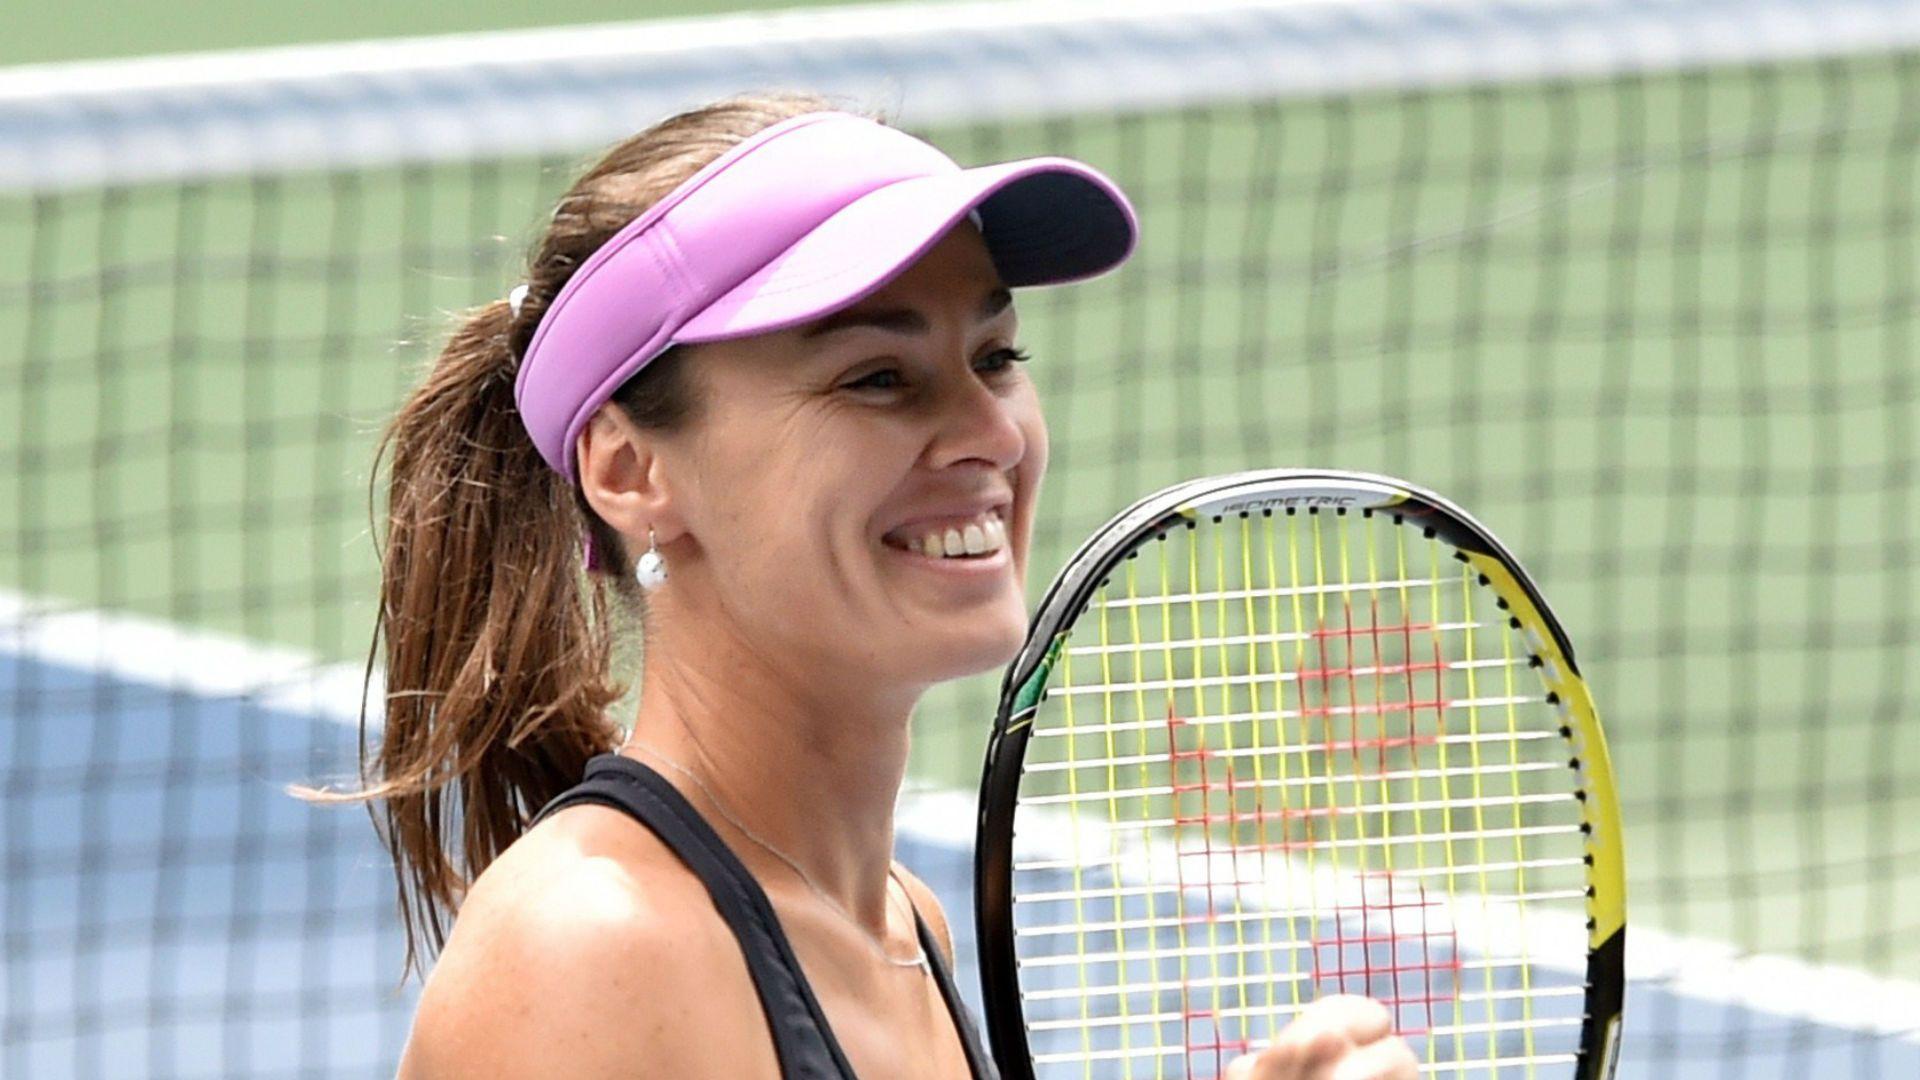 Martina Hingis named in Switzerland's Fed Cup team after 17 year